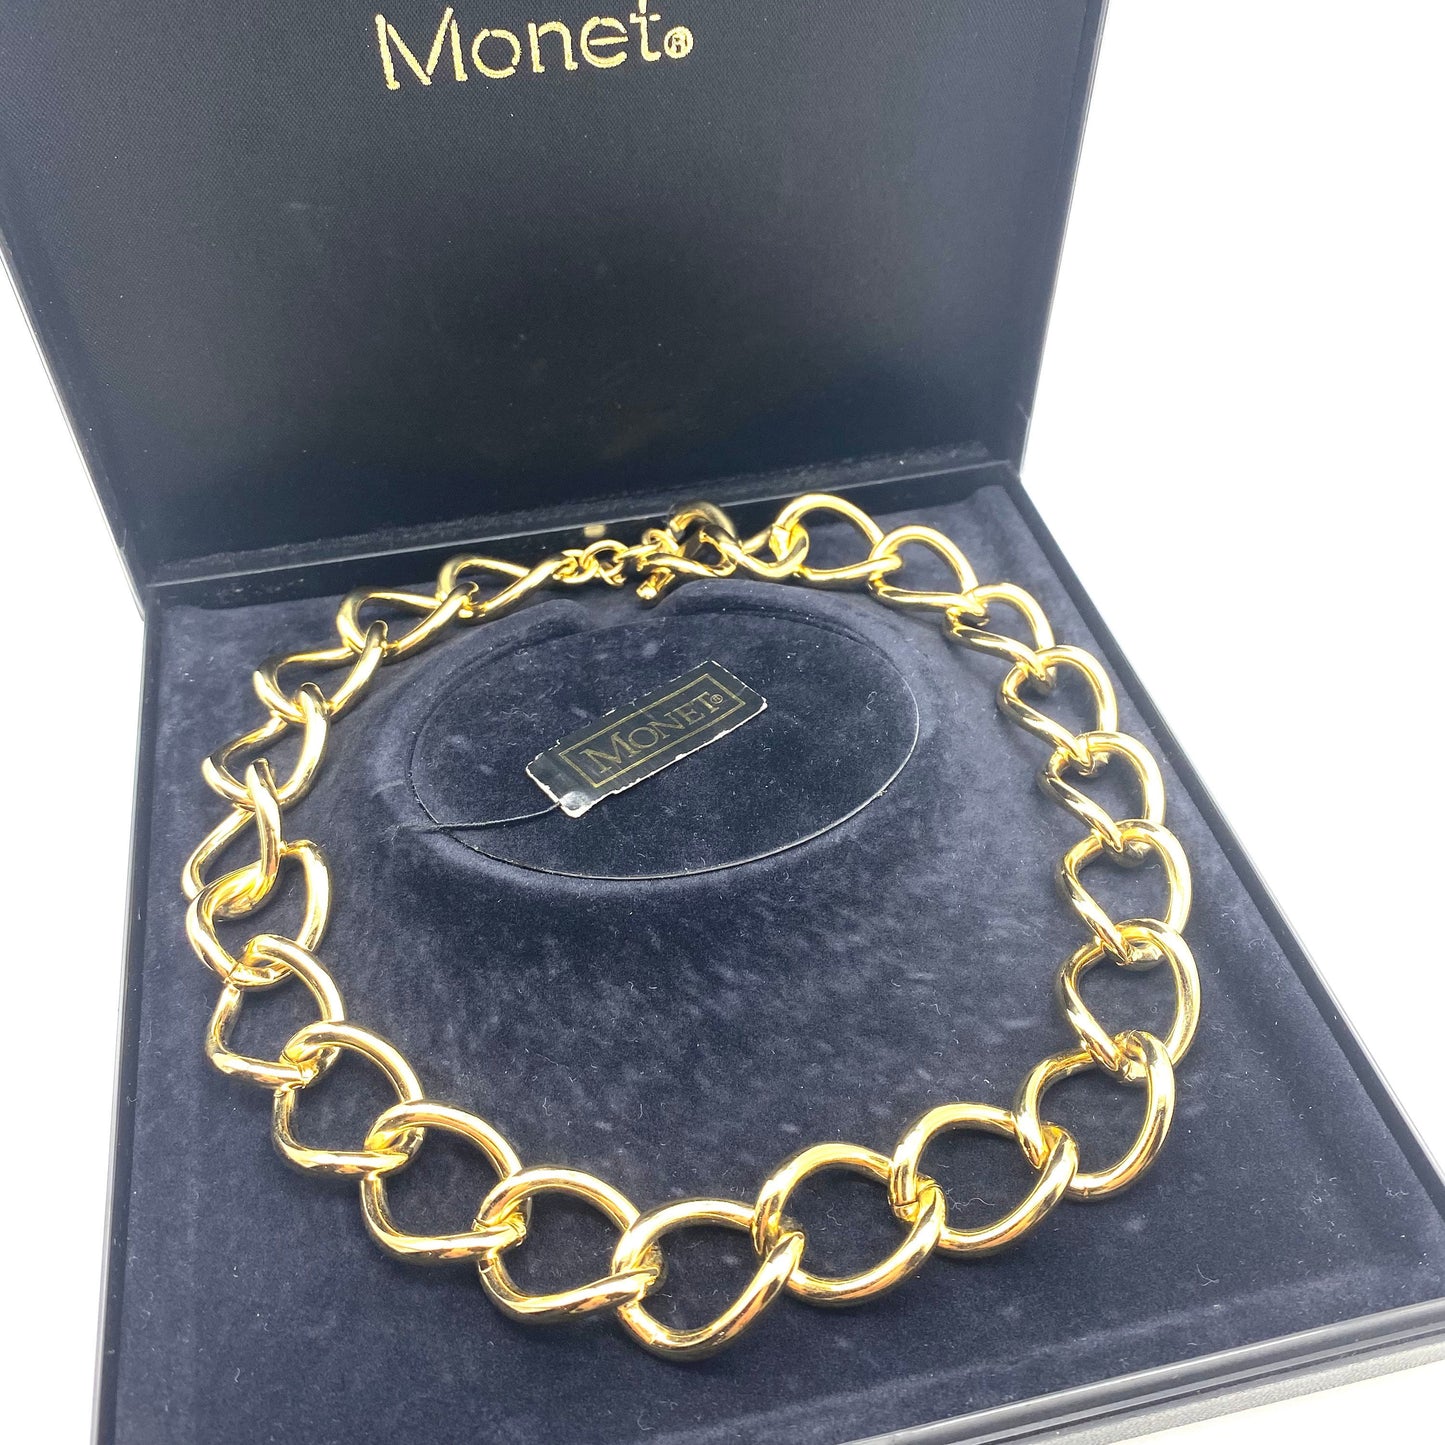 Monet Large Gold Chain with Original Box